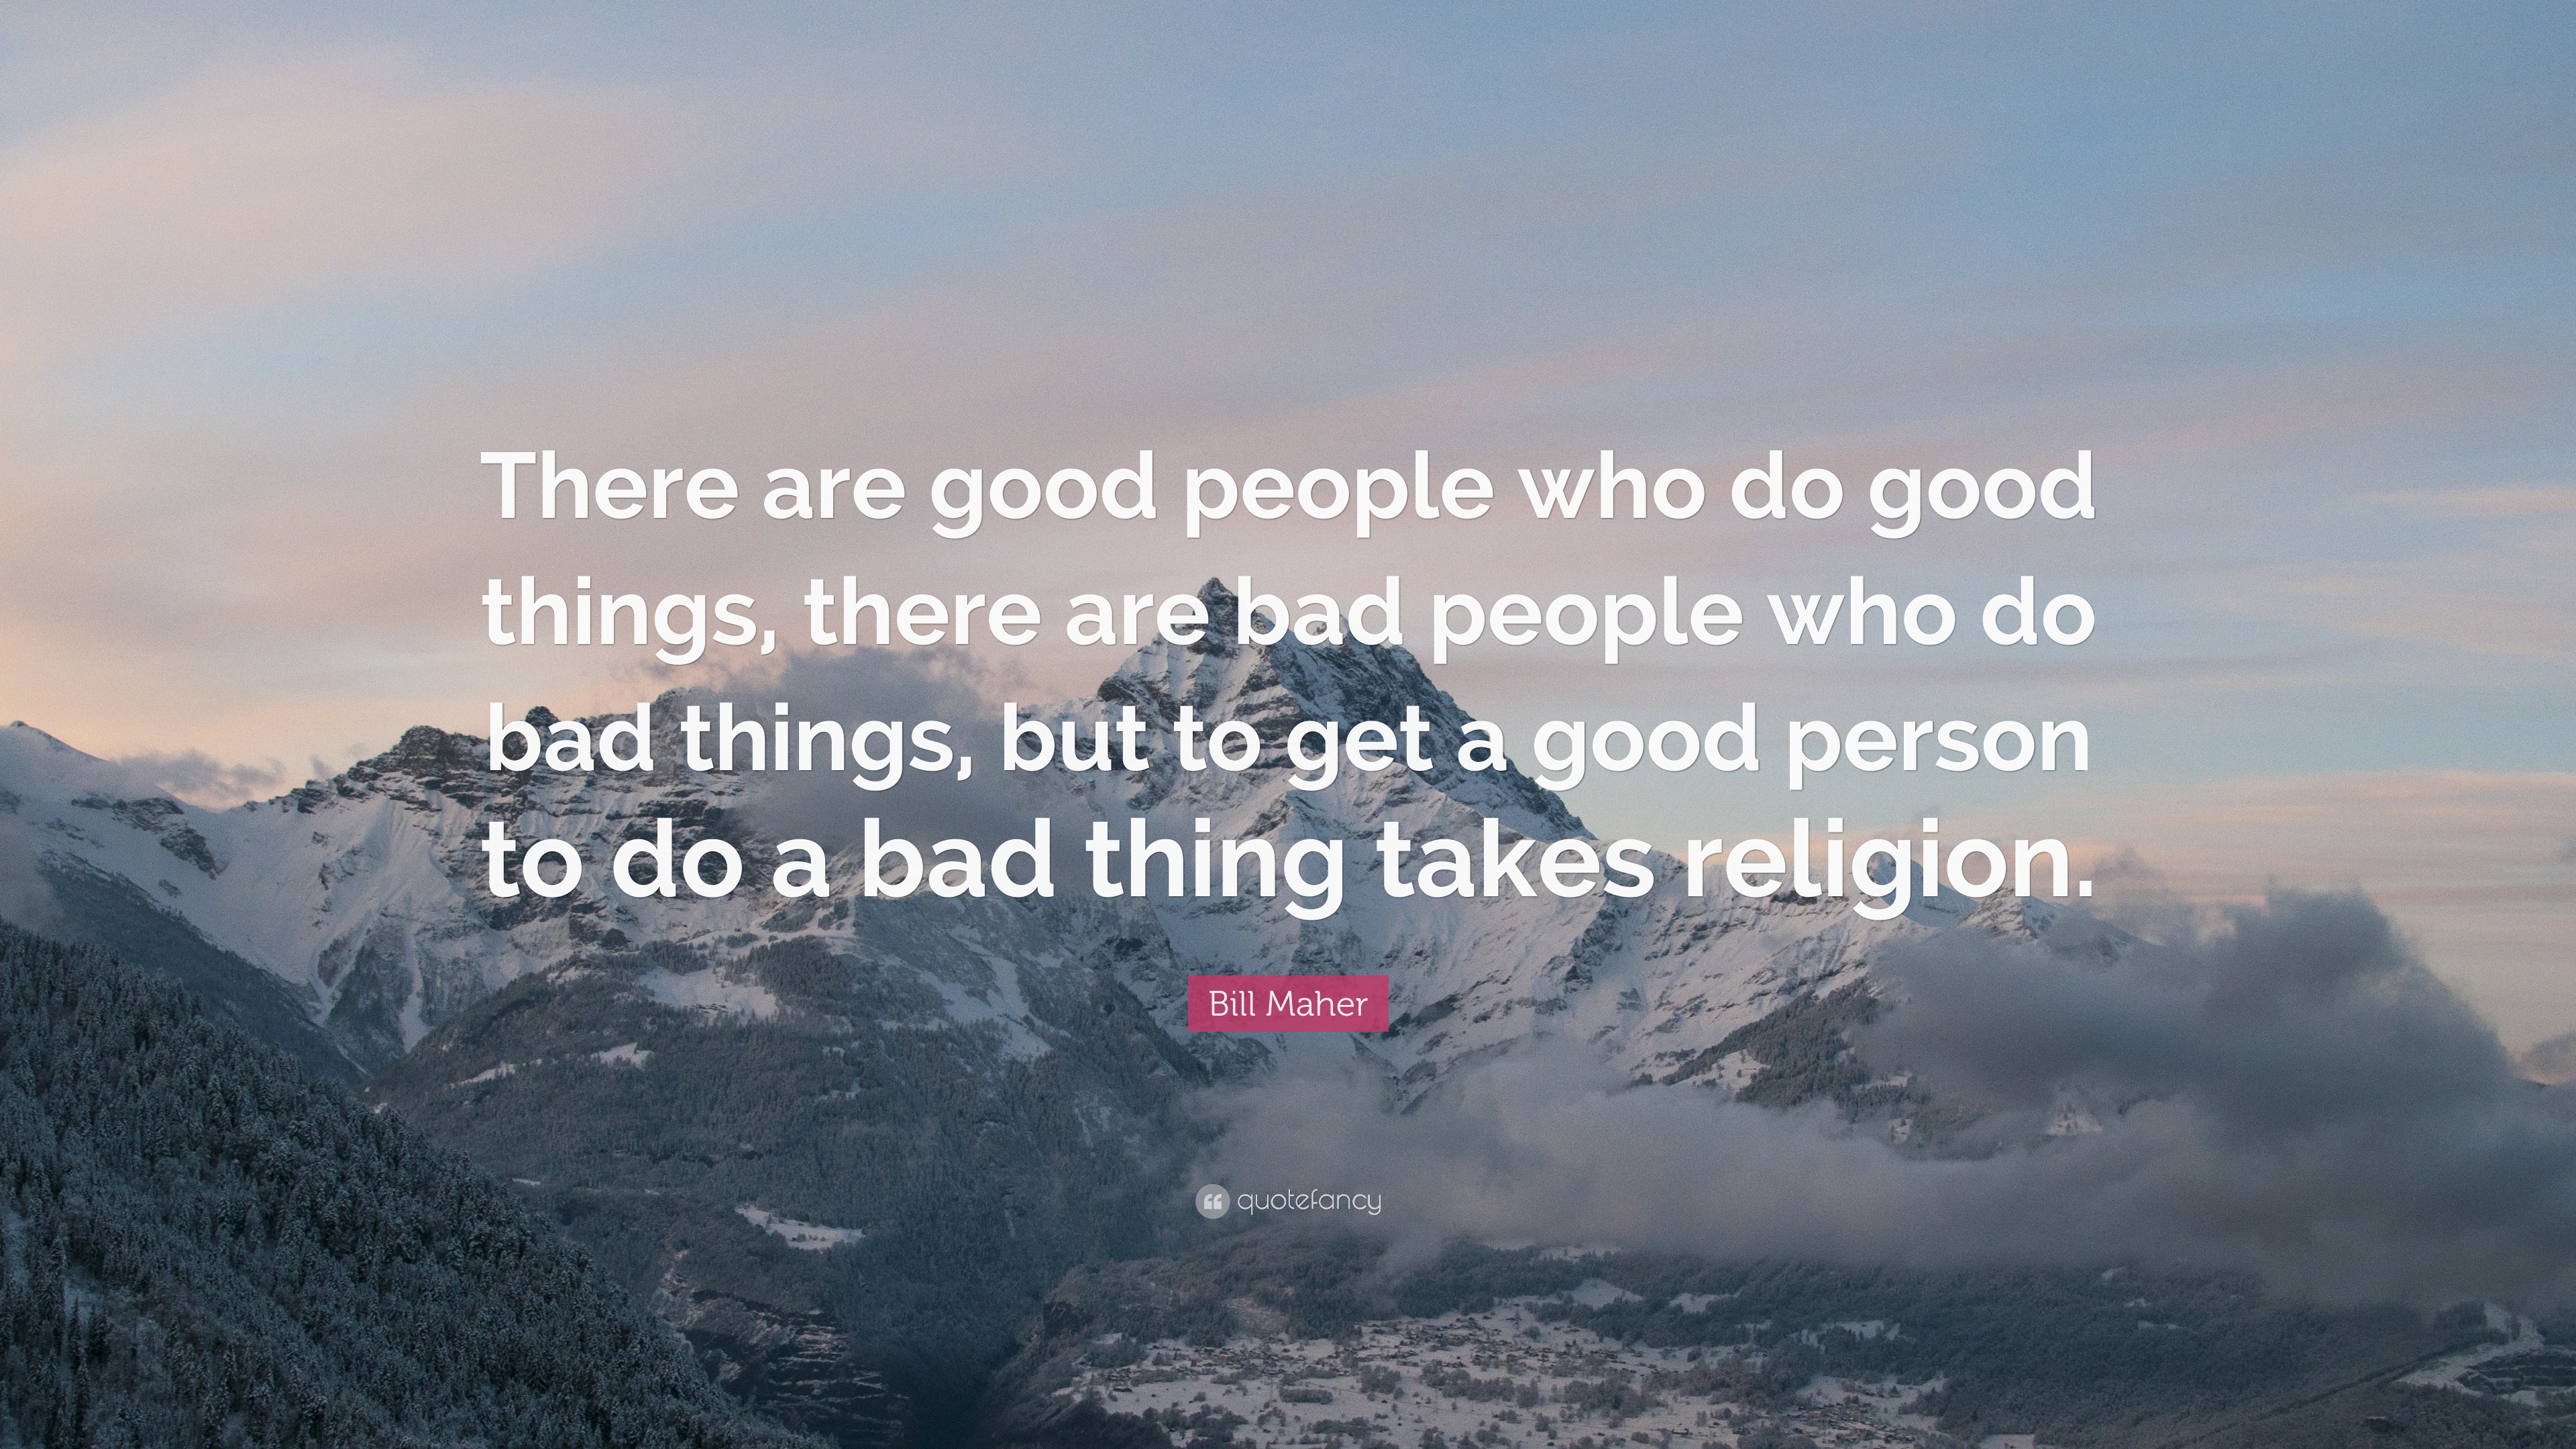 Bill Maher Quote: “There are good people who do good things, there are bad  people who do bad things, but to get a good person to do a bad t”